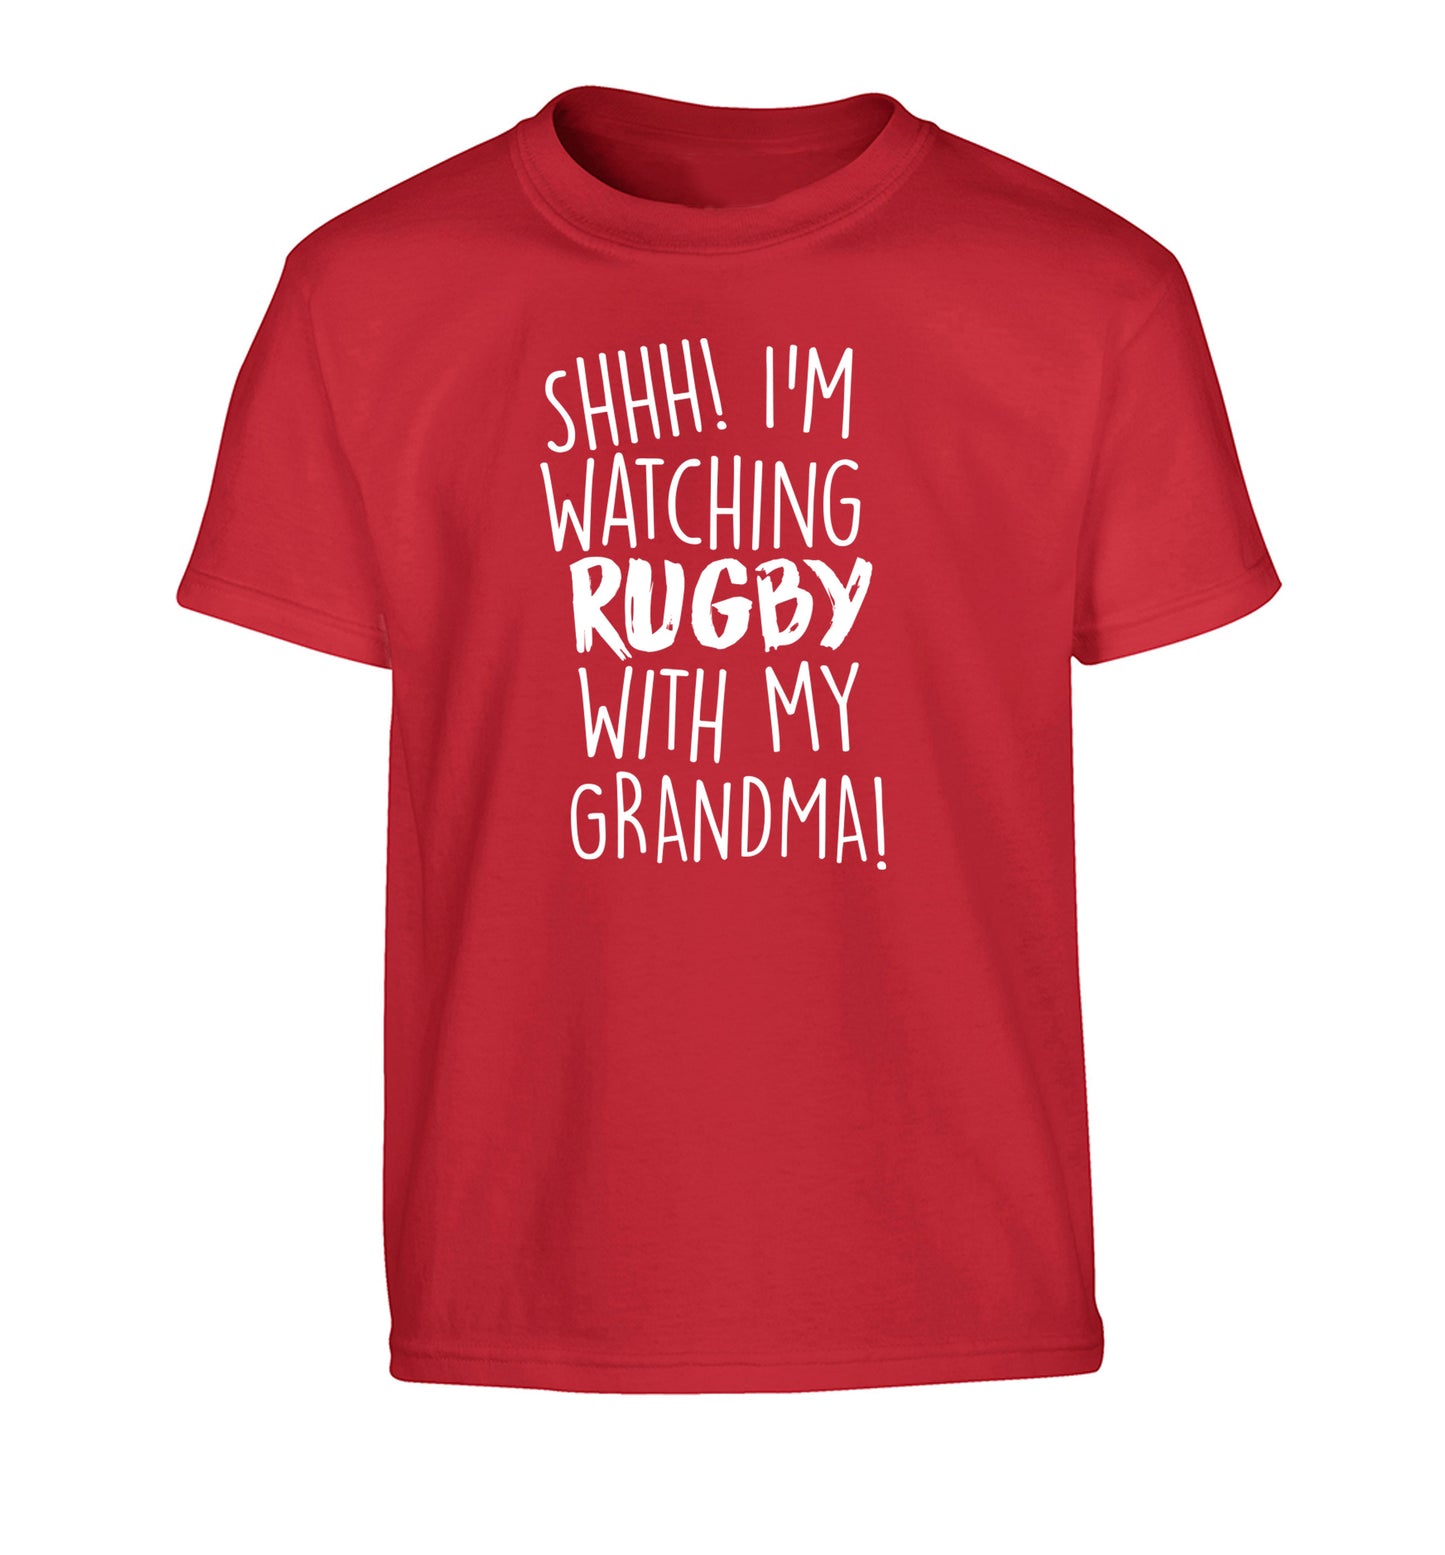 Shh I'm watching rugby with my grandma Children's red Tshirt 12-13 Years